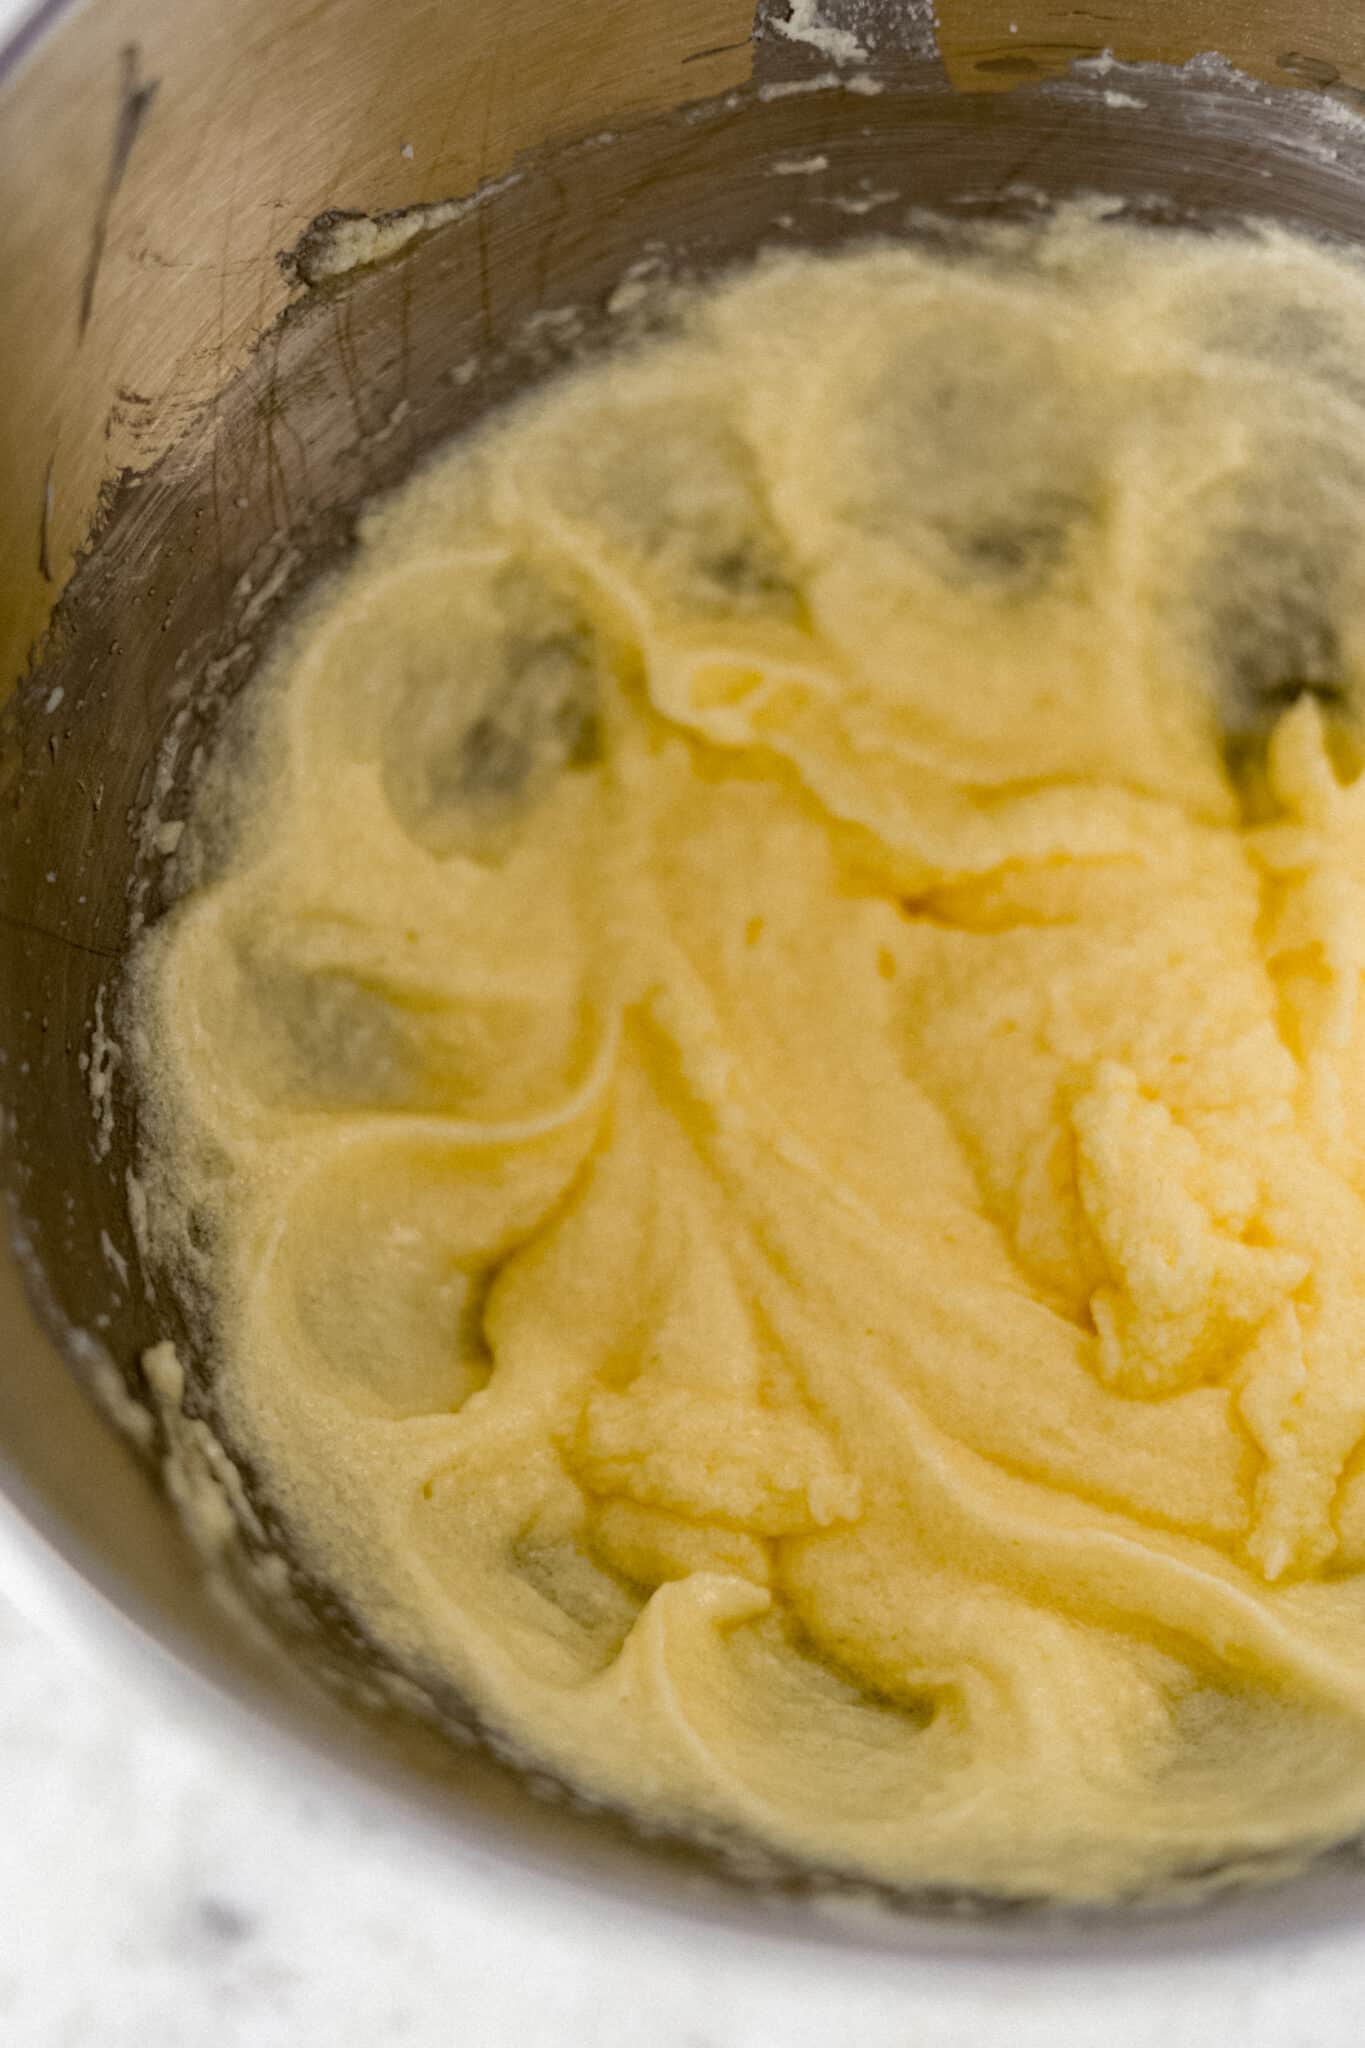 butter, sugar, and eggs mixed together in silver mixing bowl